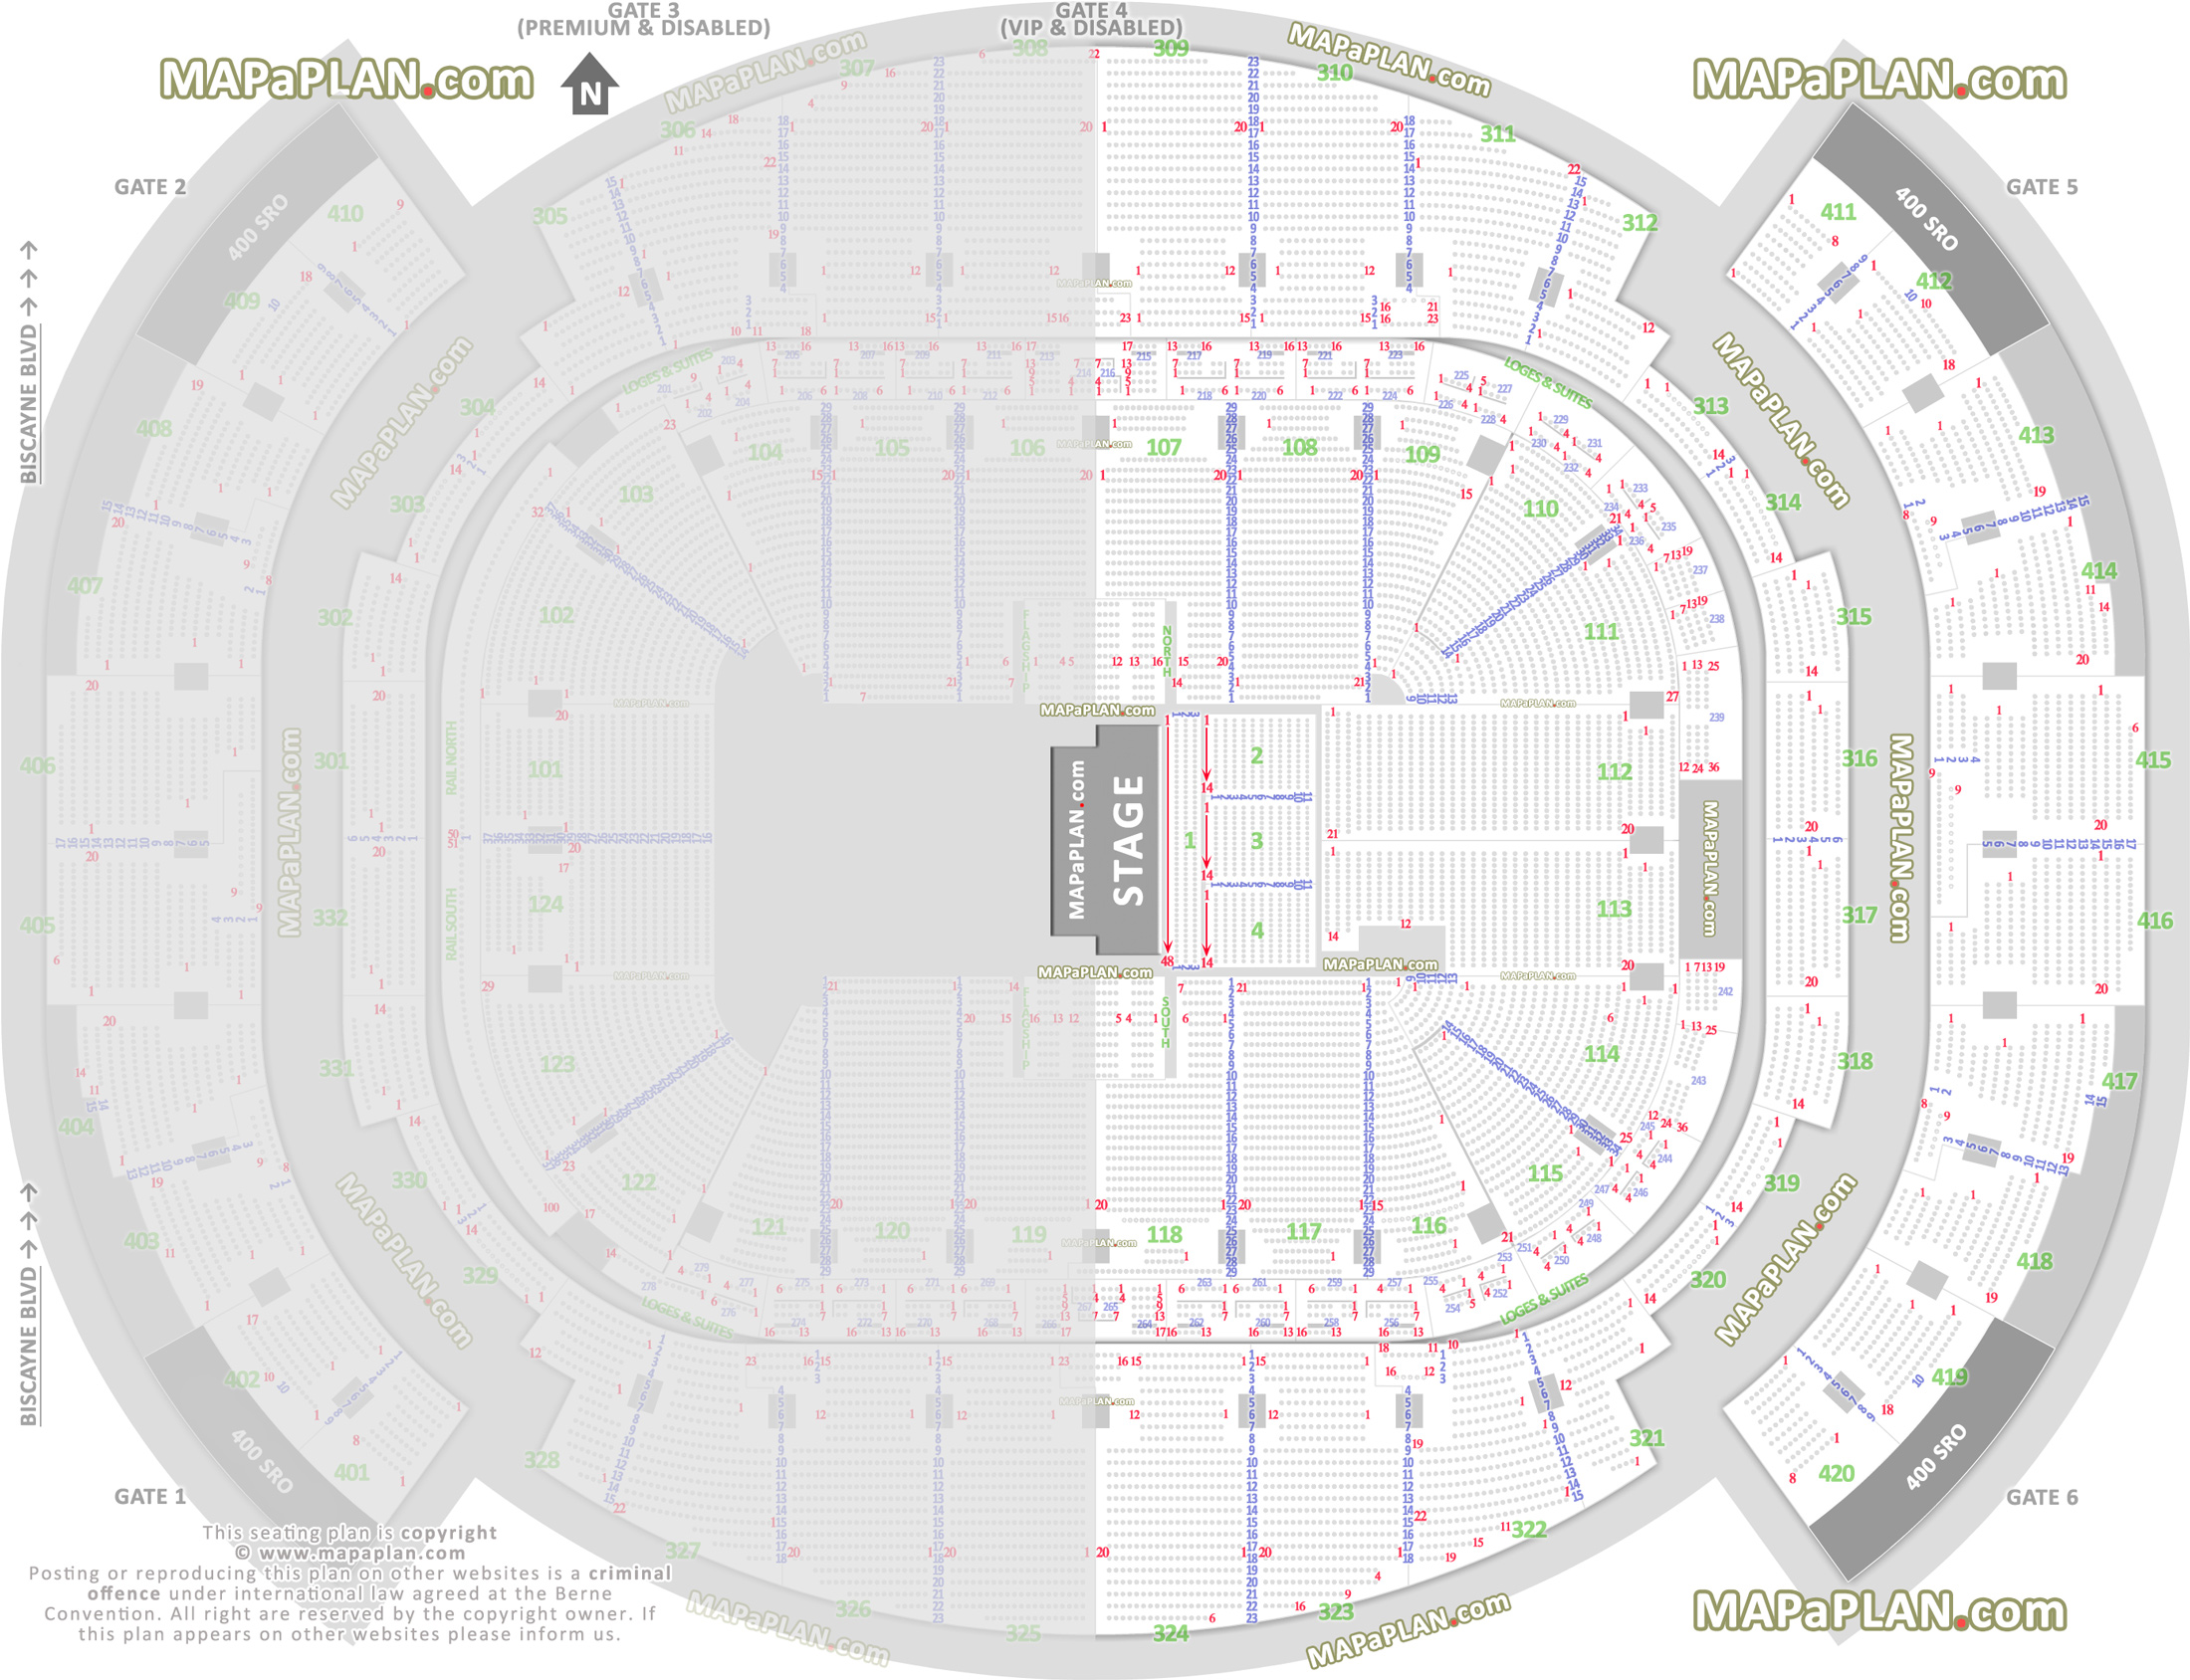 waterfront theater miami american airlines arena detailed seat numbers row Miami Kaseya Center Arena seating chart